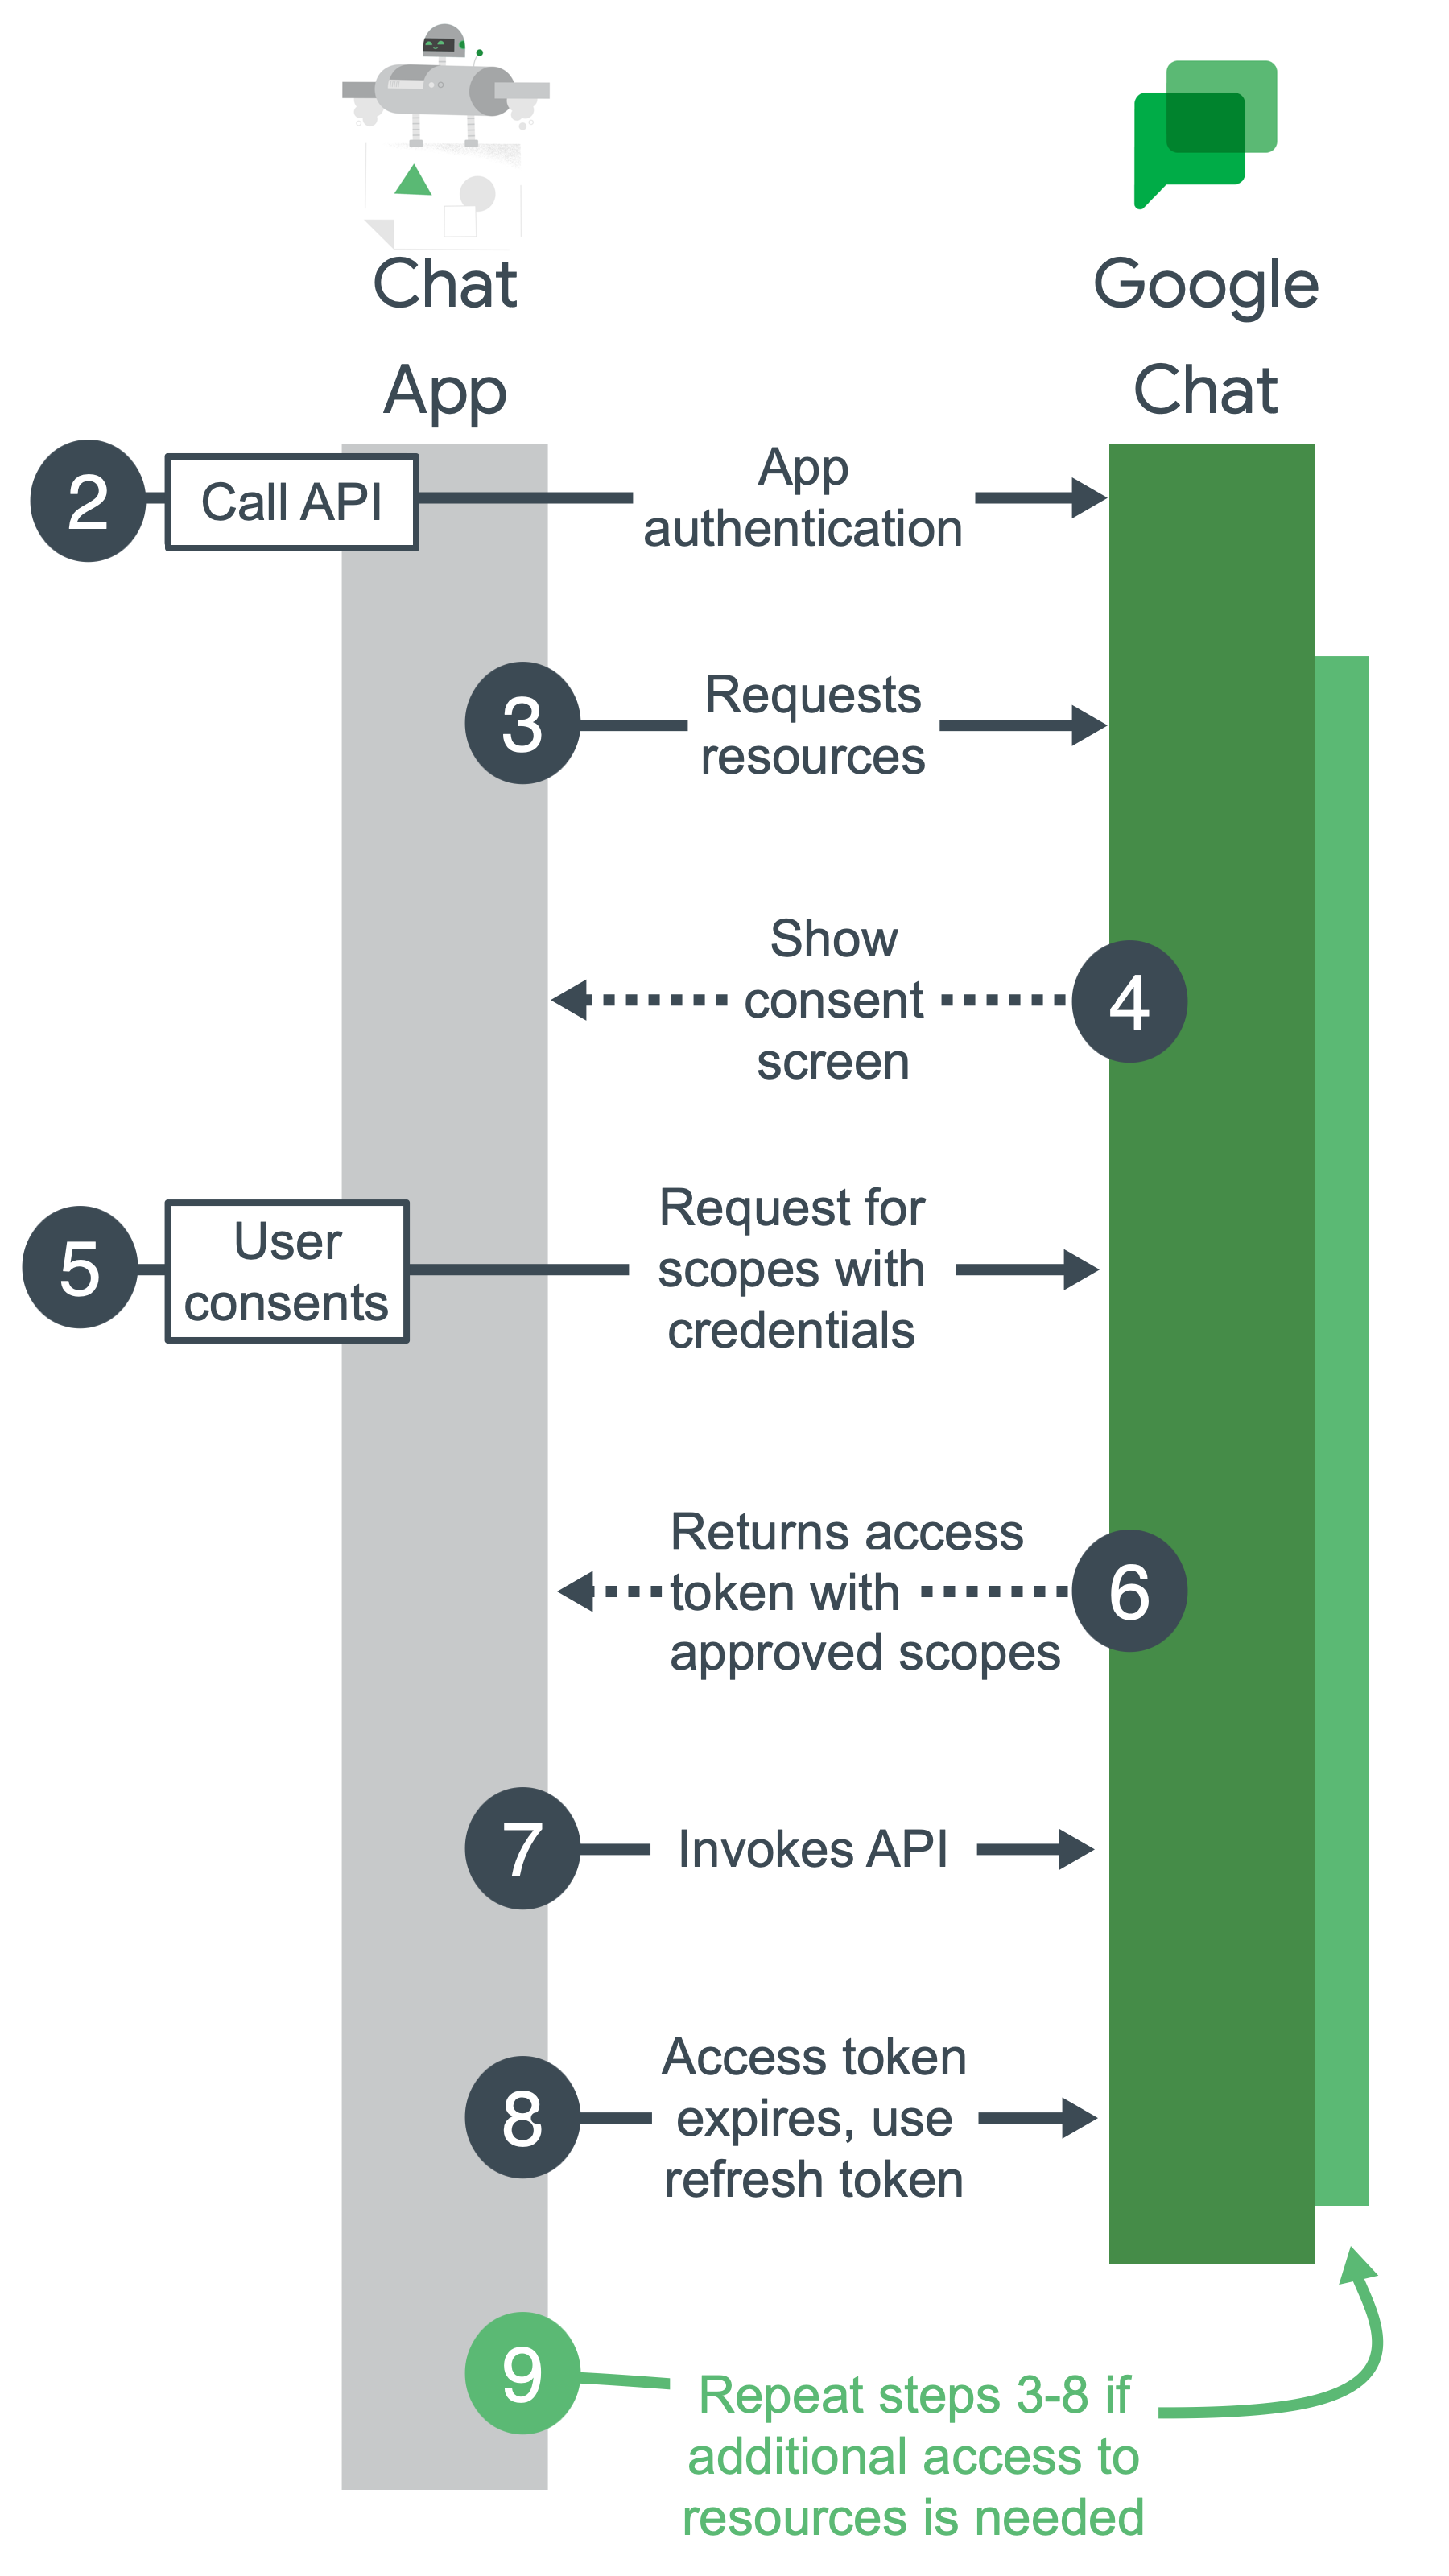 High-level steps for Google Chat authentication and authorization